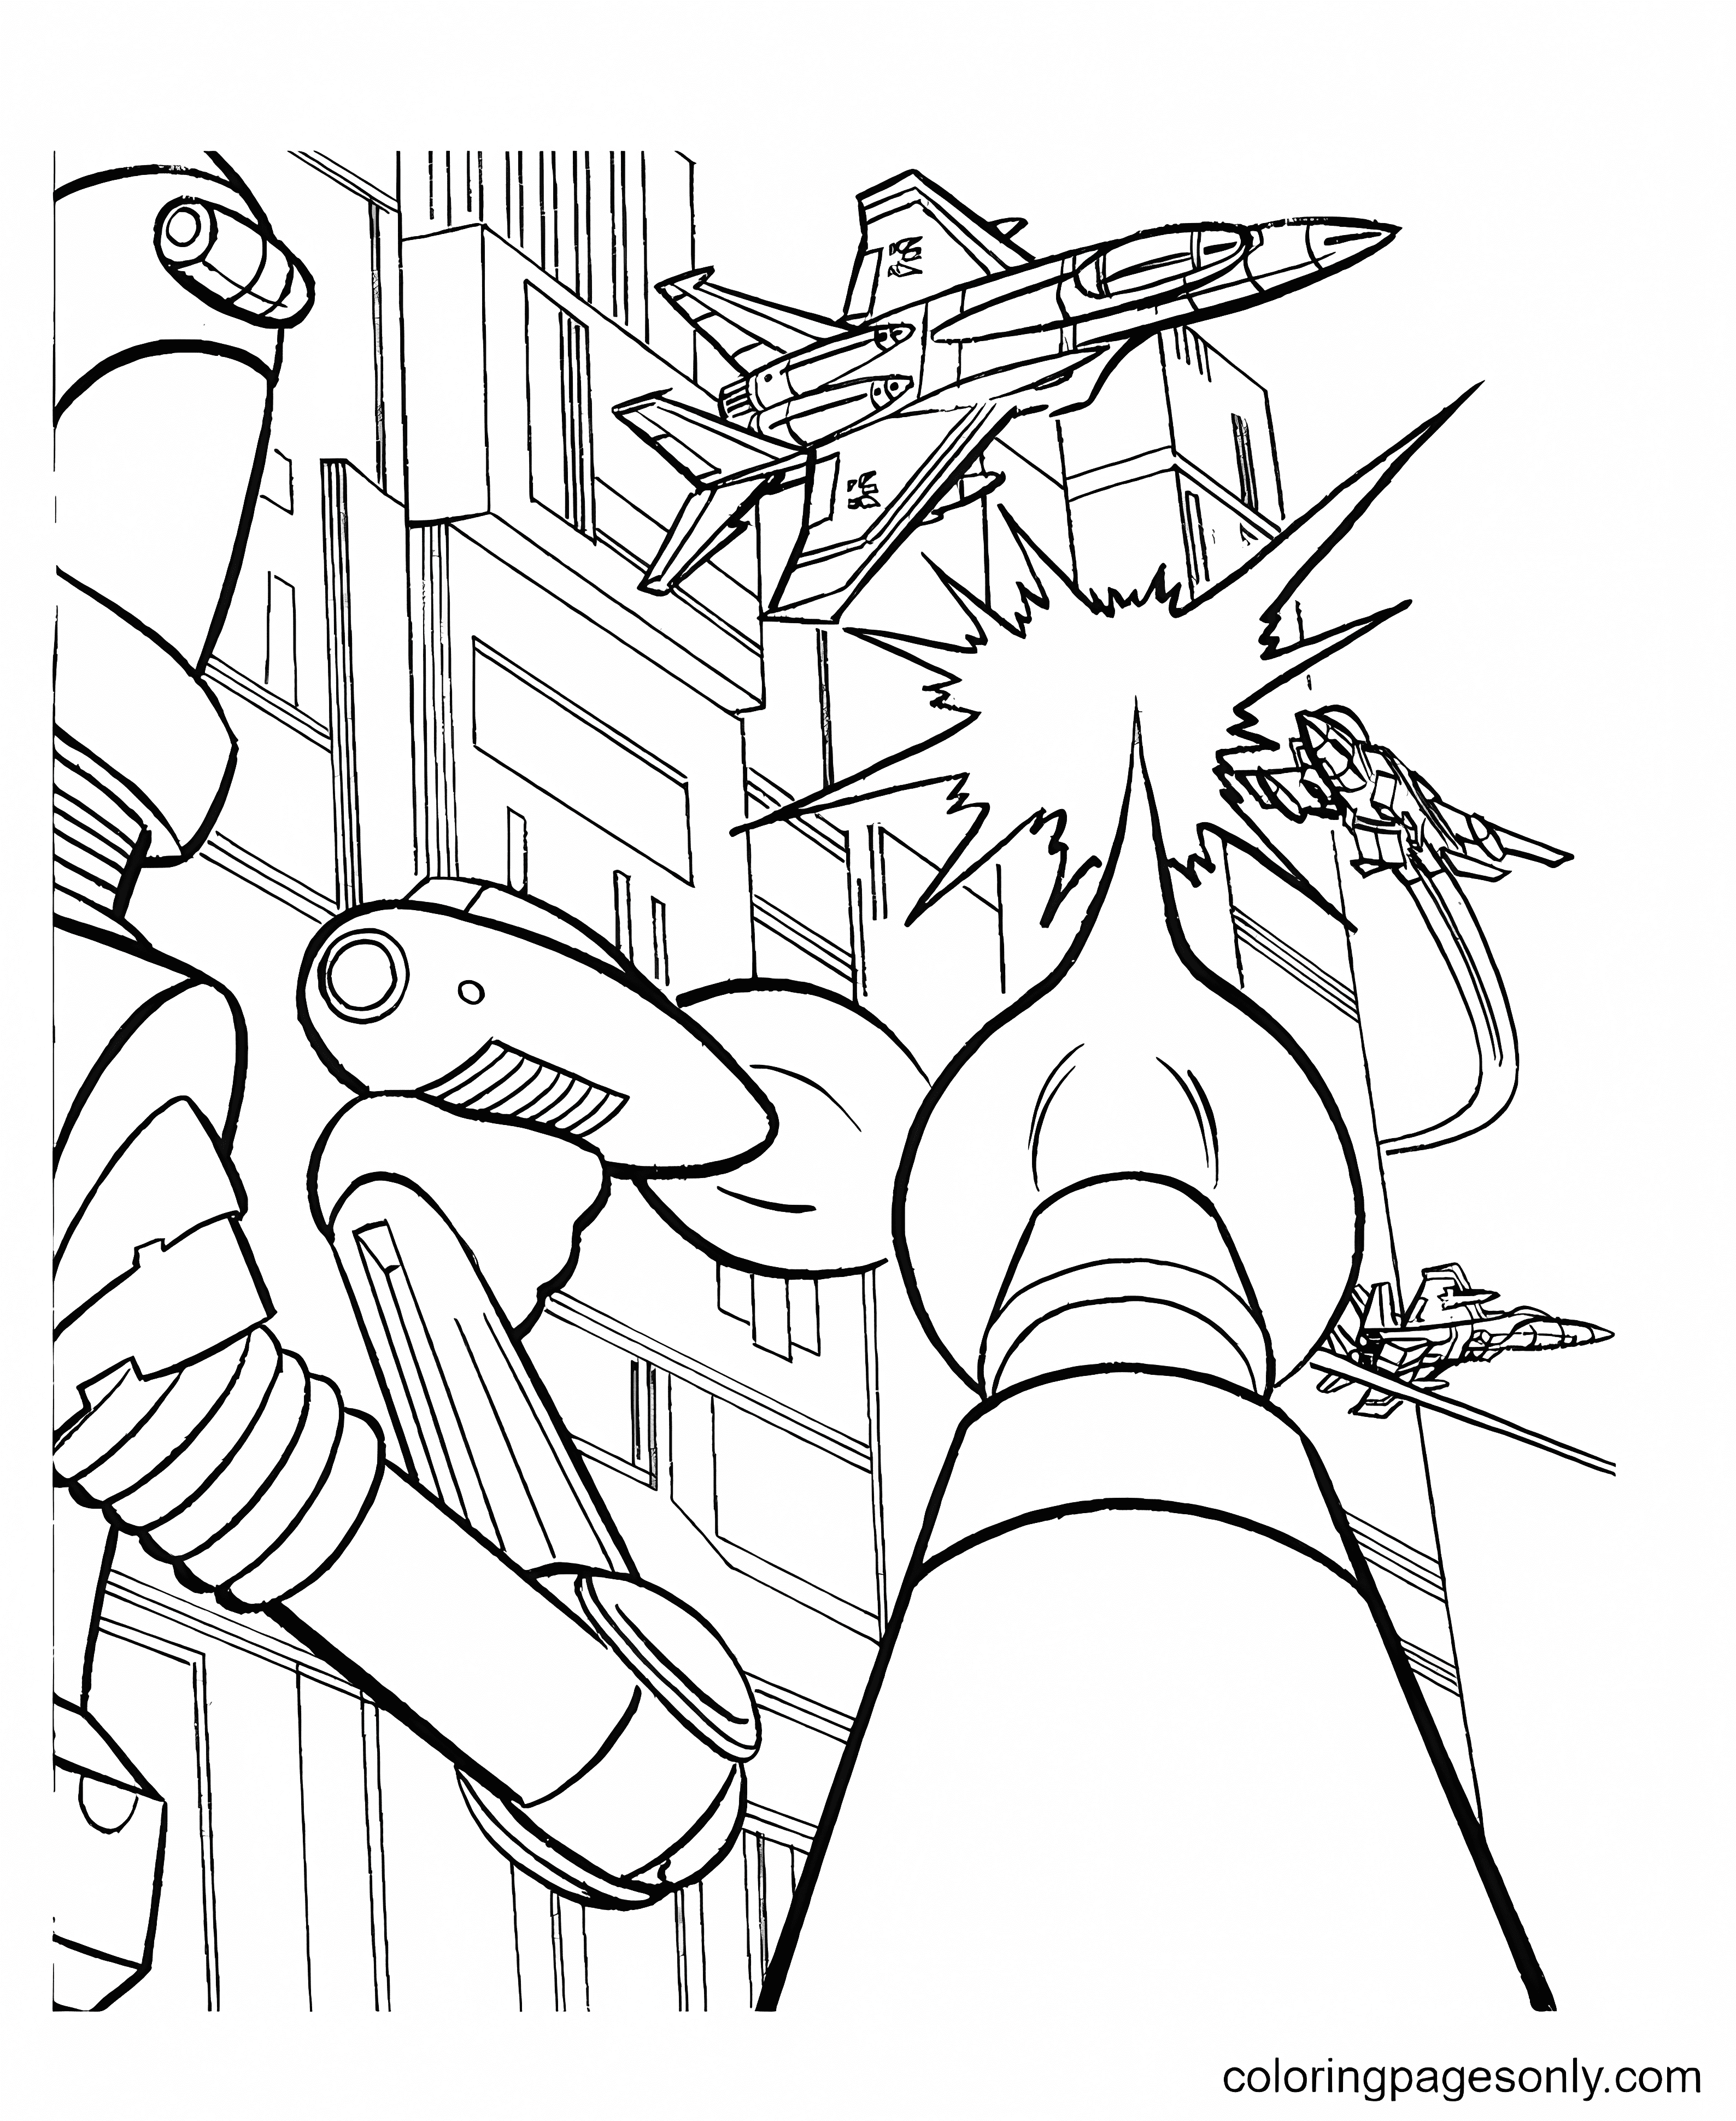 Transformers fight Coloring Pages